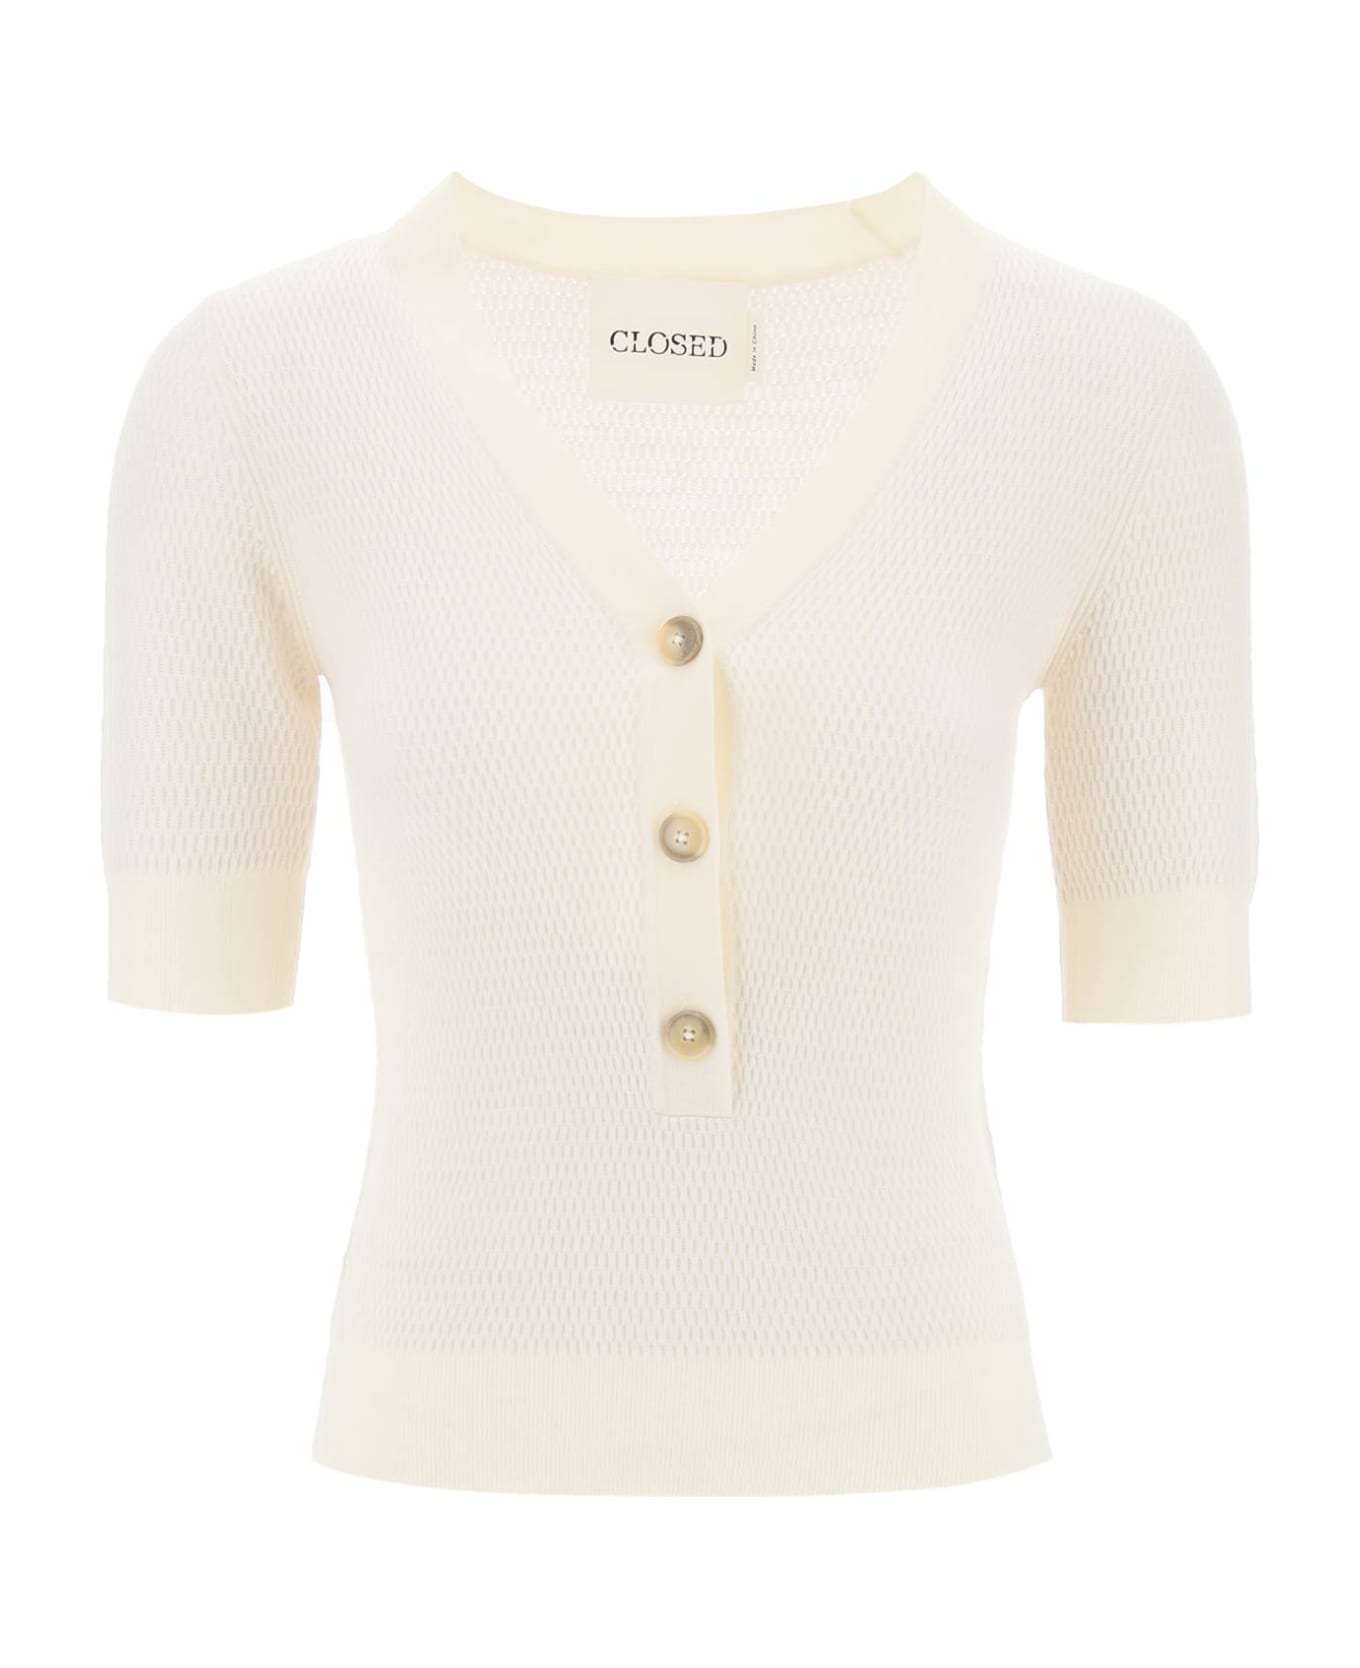 Closed Knitted Top With Short Sleeves - NEUTRALS